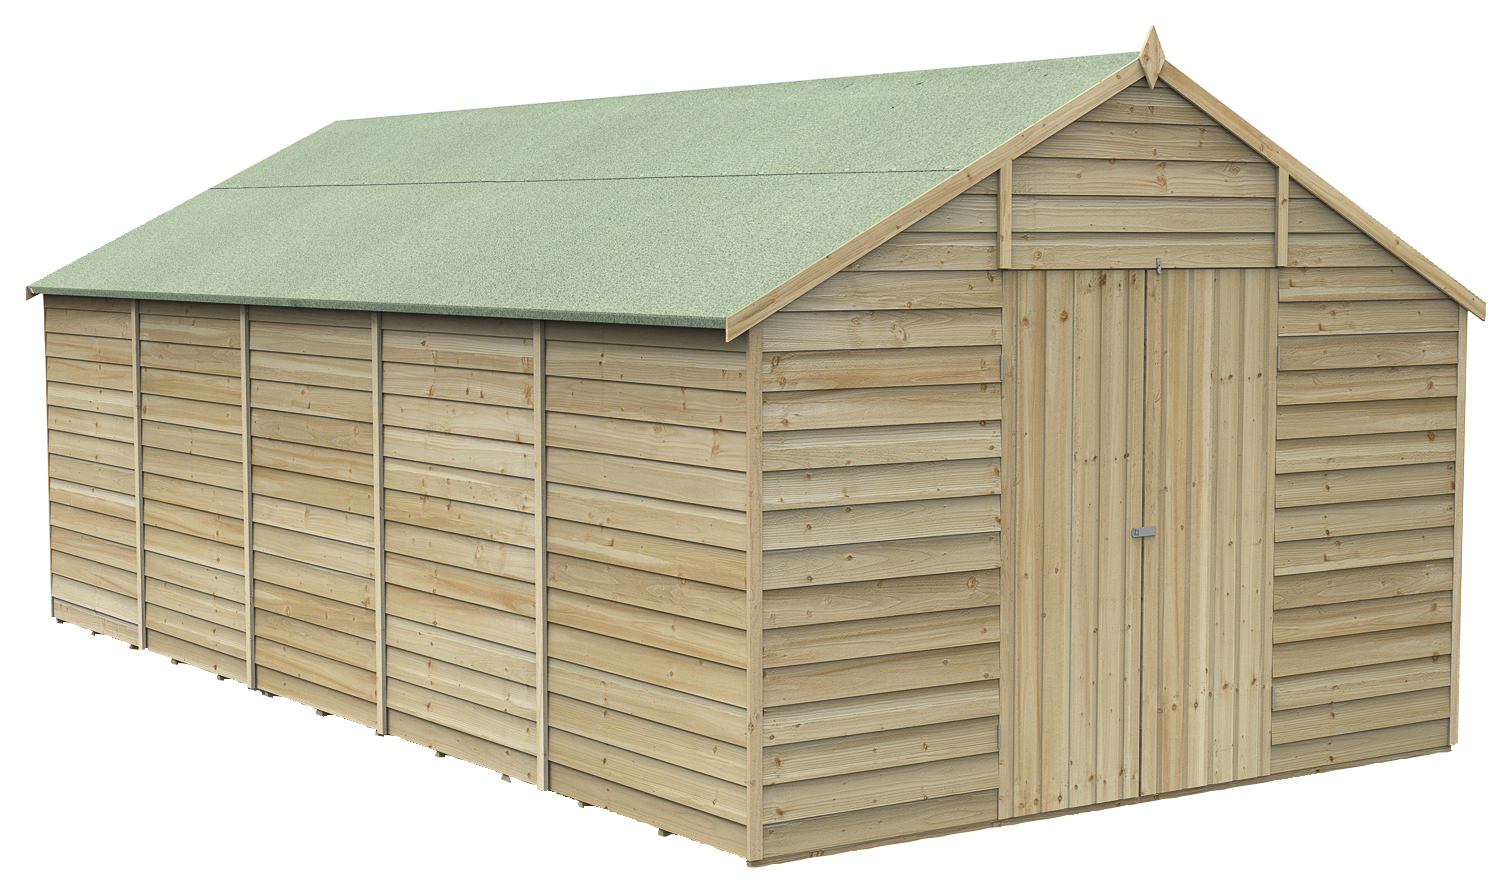 Forest Garden 10 x 20ft 4Life Apex Overlap Pressure Treated Double Door Windowless Shed with Base and Assembly